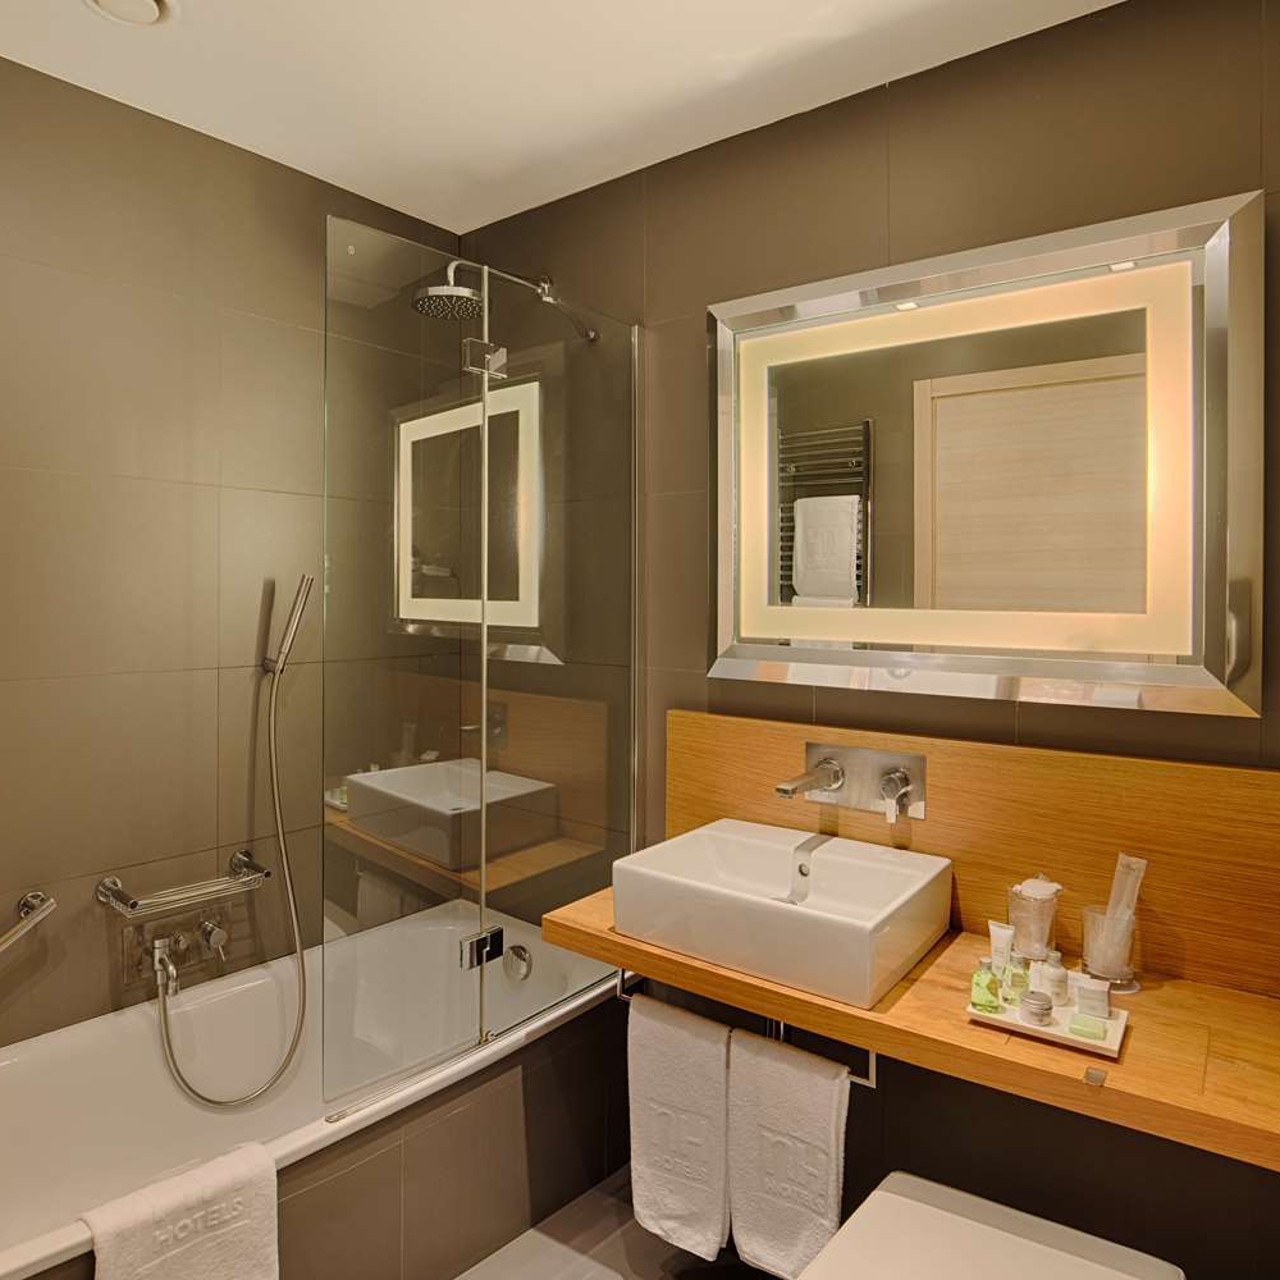 Hotel Nh Firenze Italy At Hrs With Free, Firenze Bathtub Wall Set